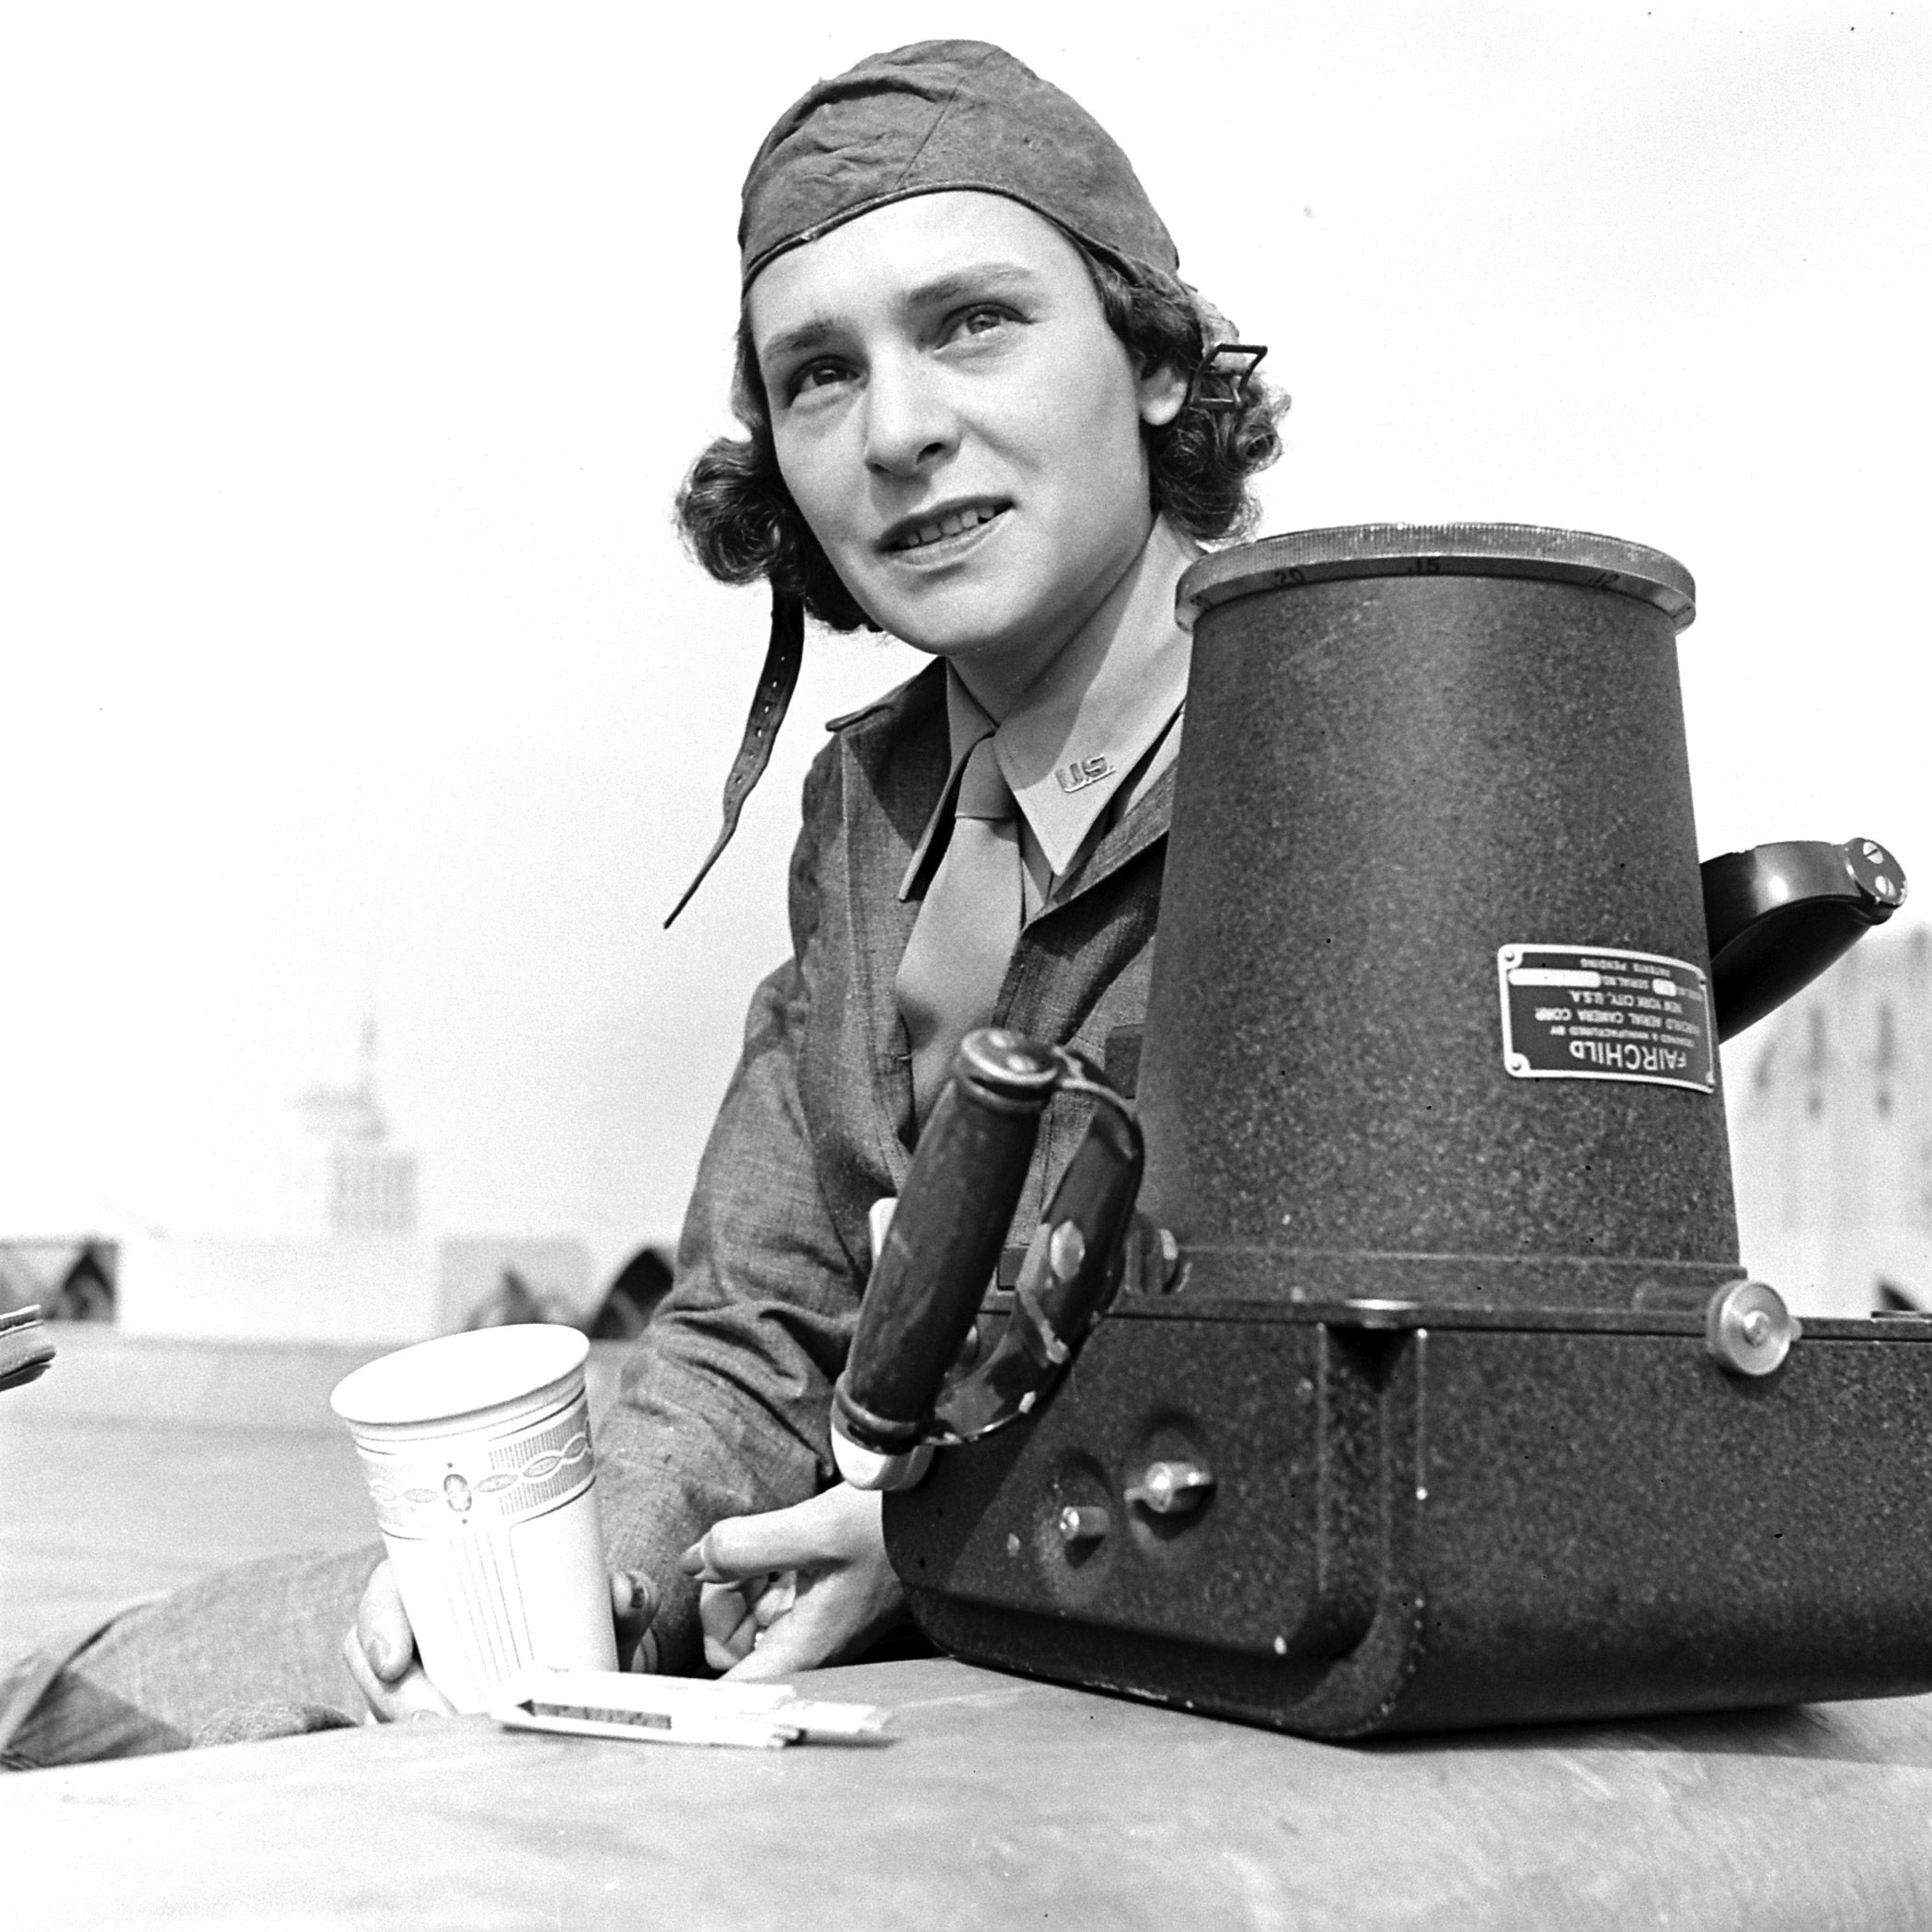 LIFE photographer Margaret Bourke-White and her camera.